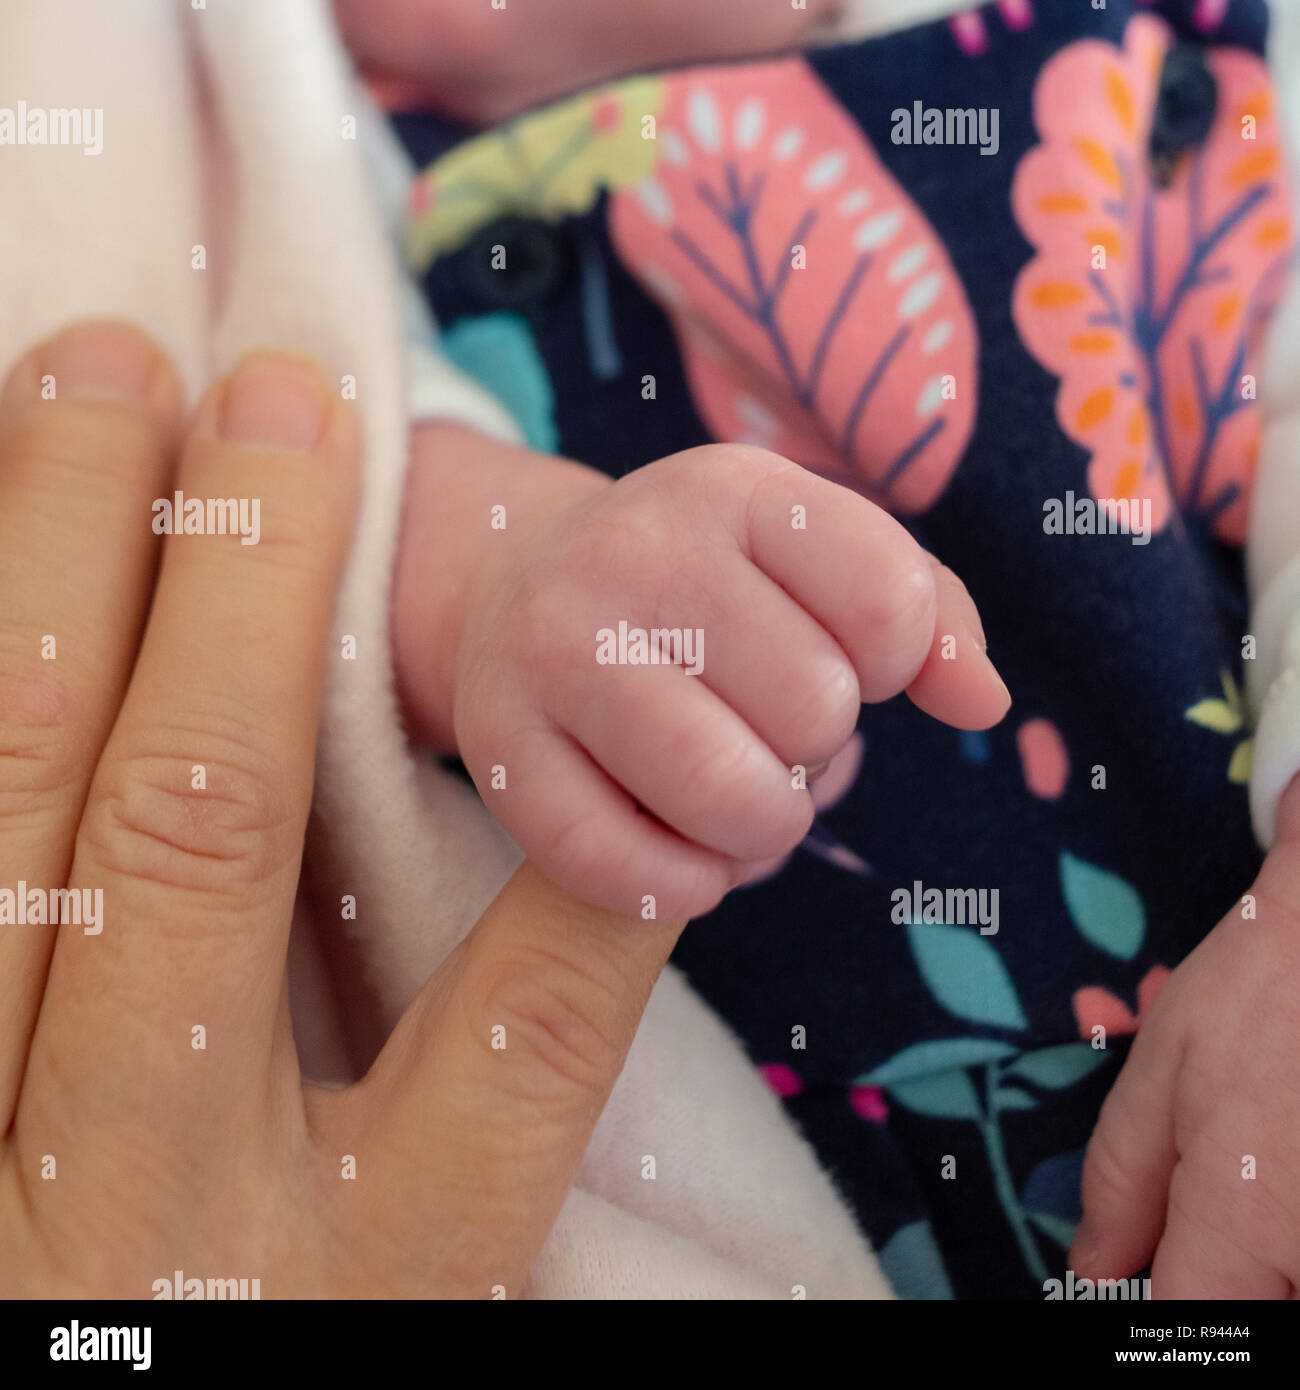 Hand and fingers of a new born baby wrapped around an adult finger. Stock Photo